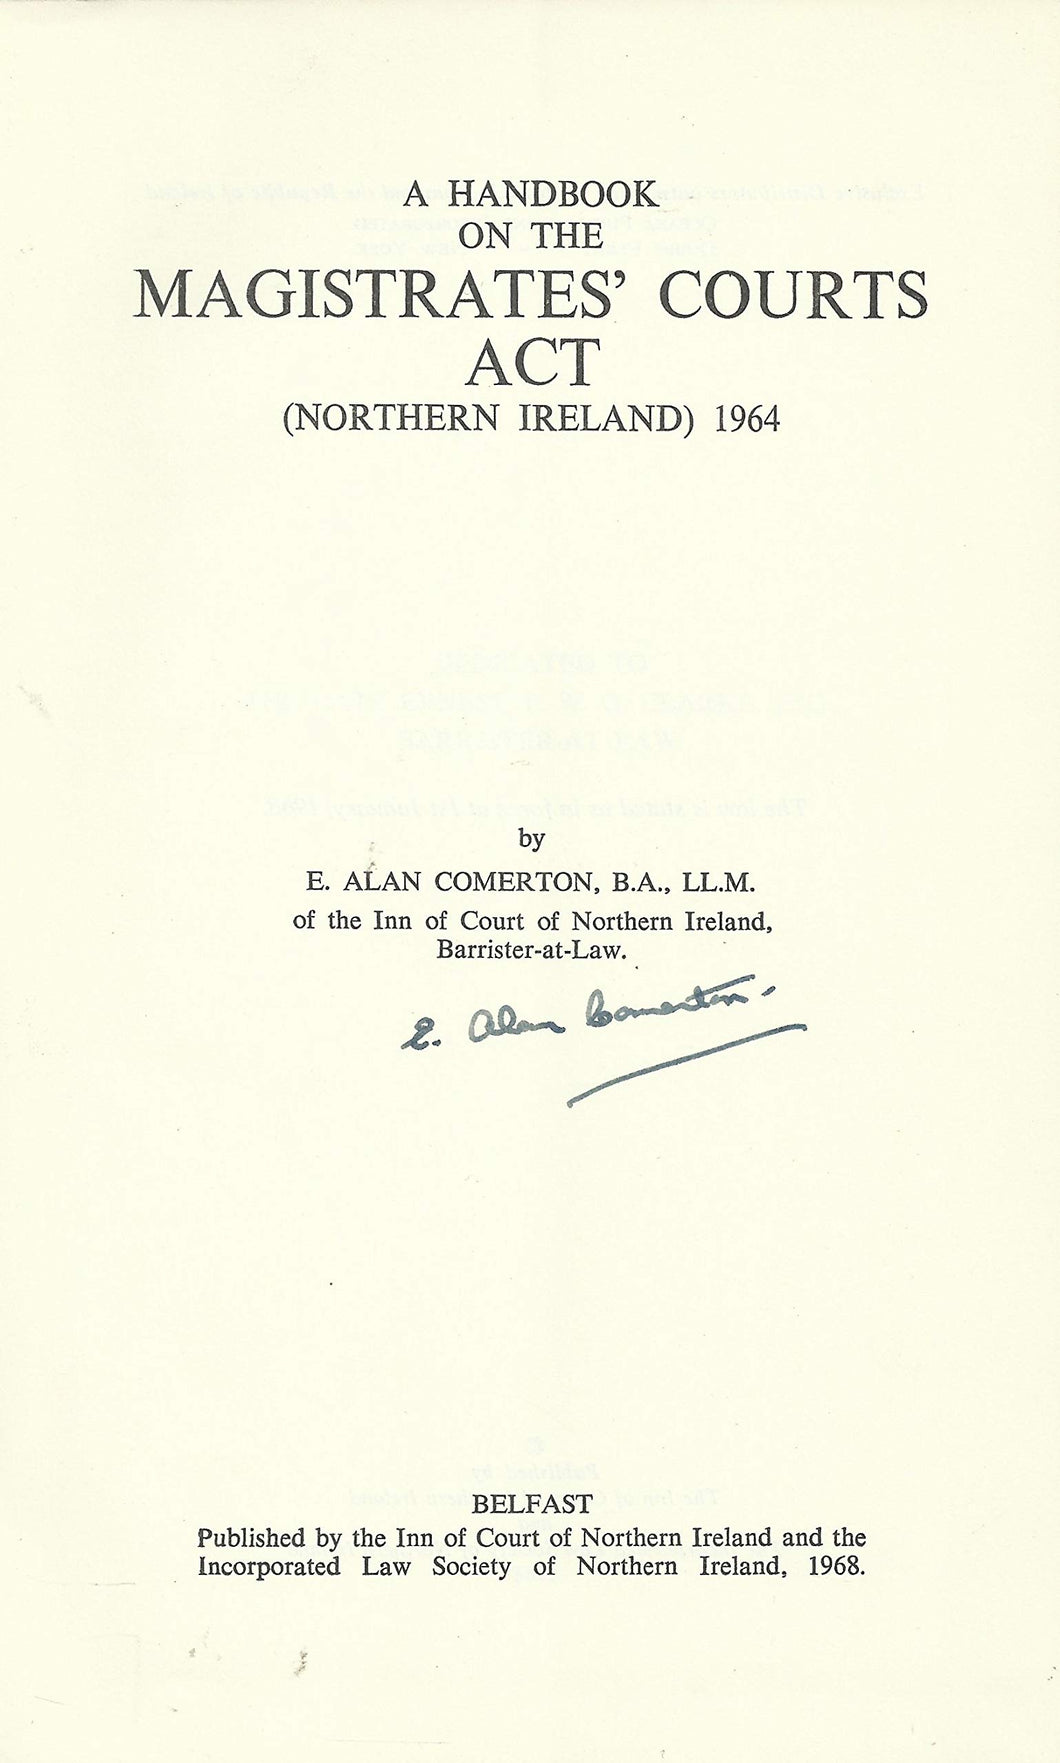 A Handbook on the Magistrates' Courts Act, Northern Ireland, 1964